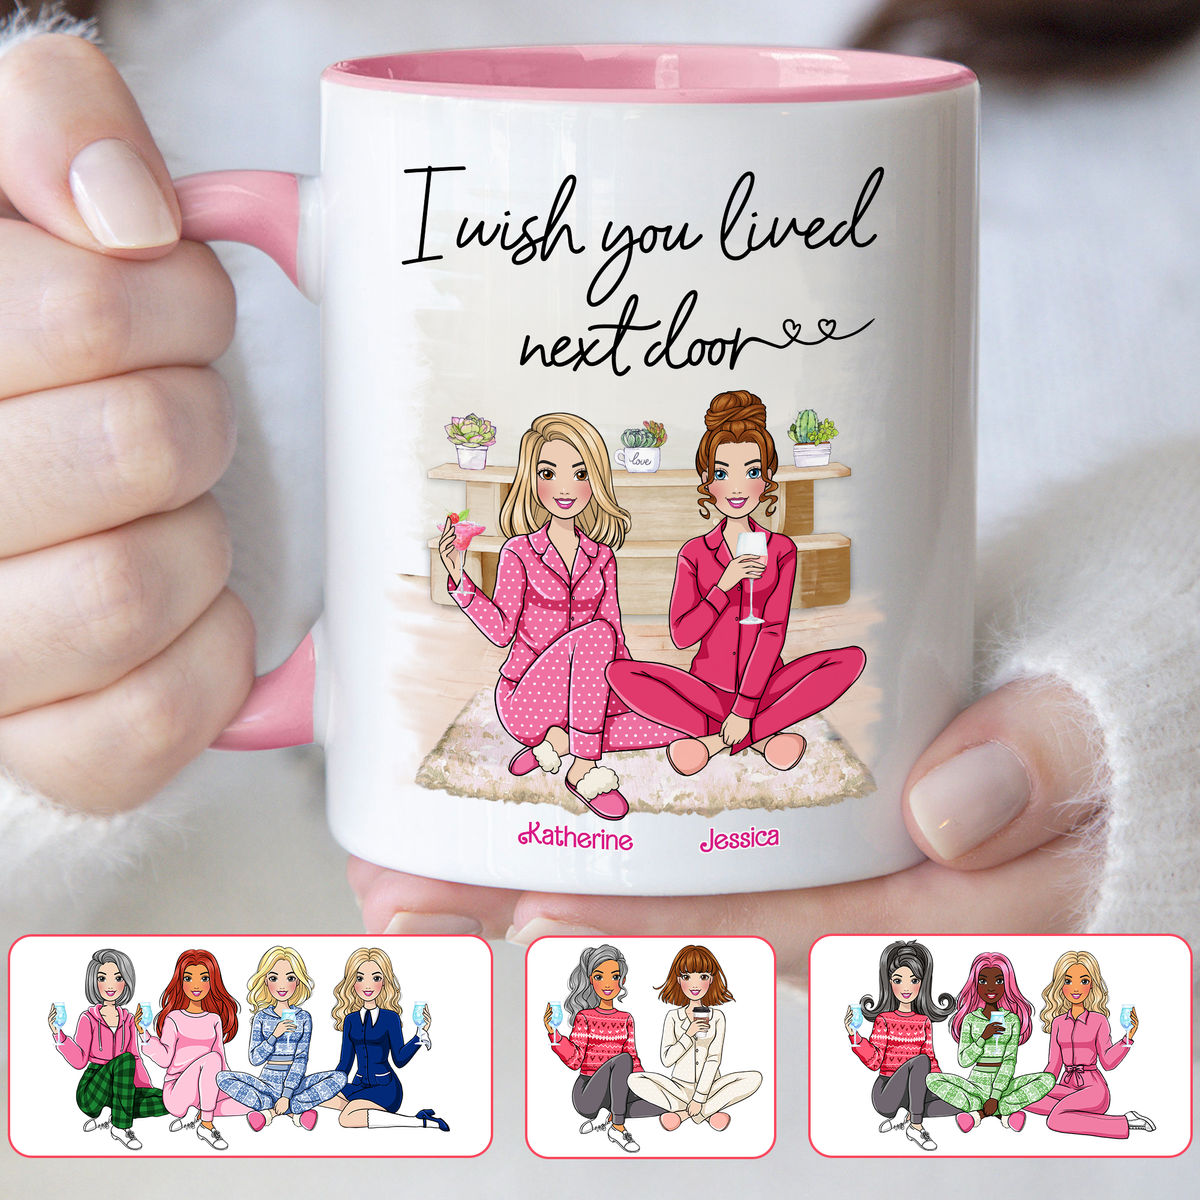 Personalized Mug - Besties Mug - I wish you lived next door - Gift for friends, gift for birthday, friends mug, gift for her, gift for sisters_1